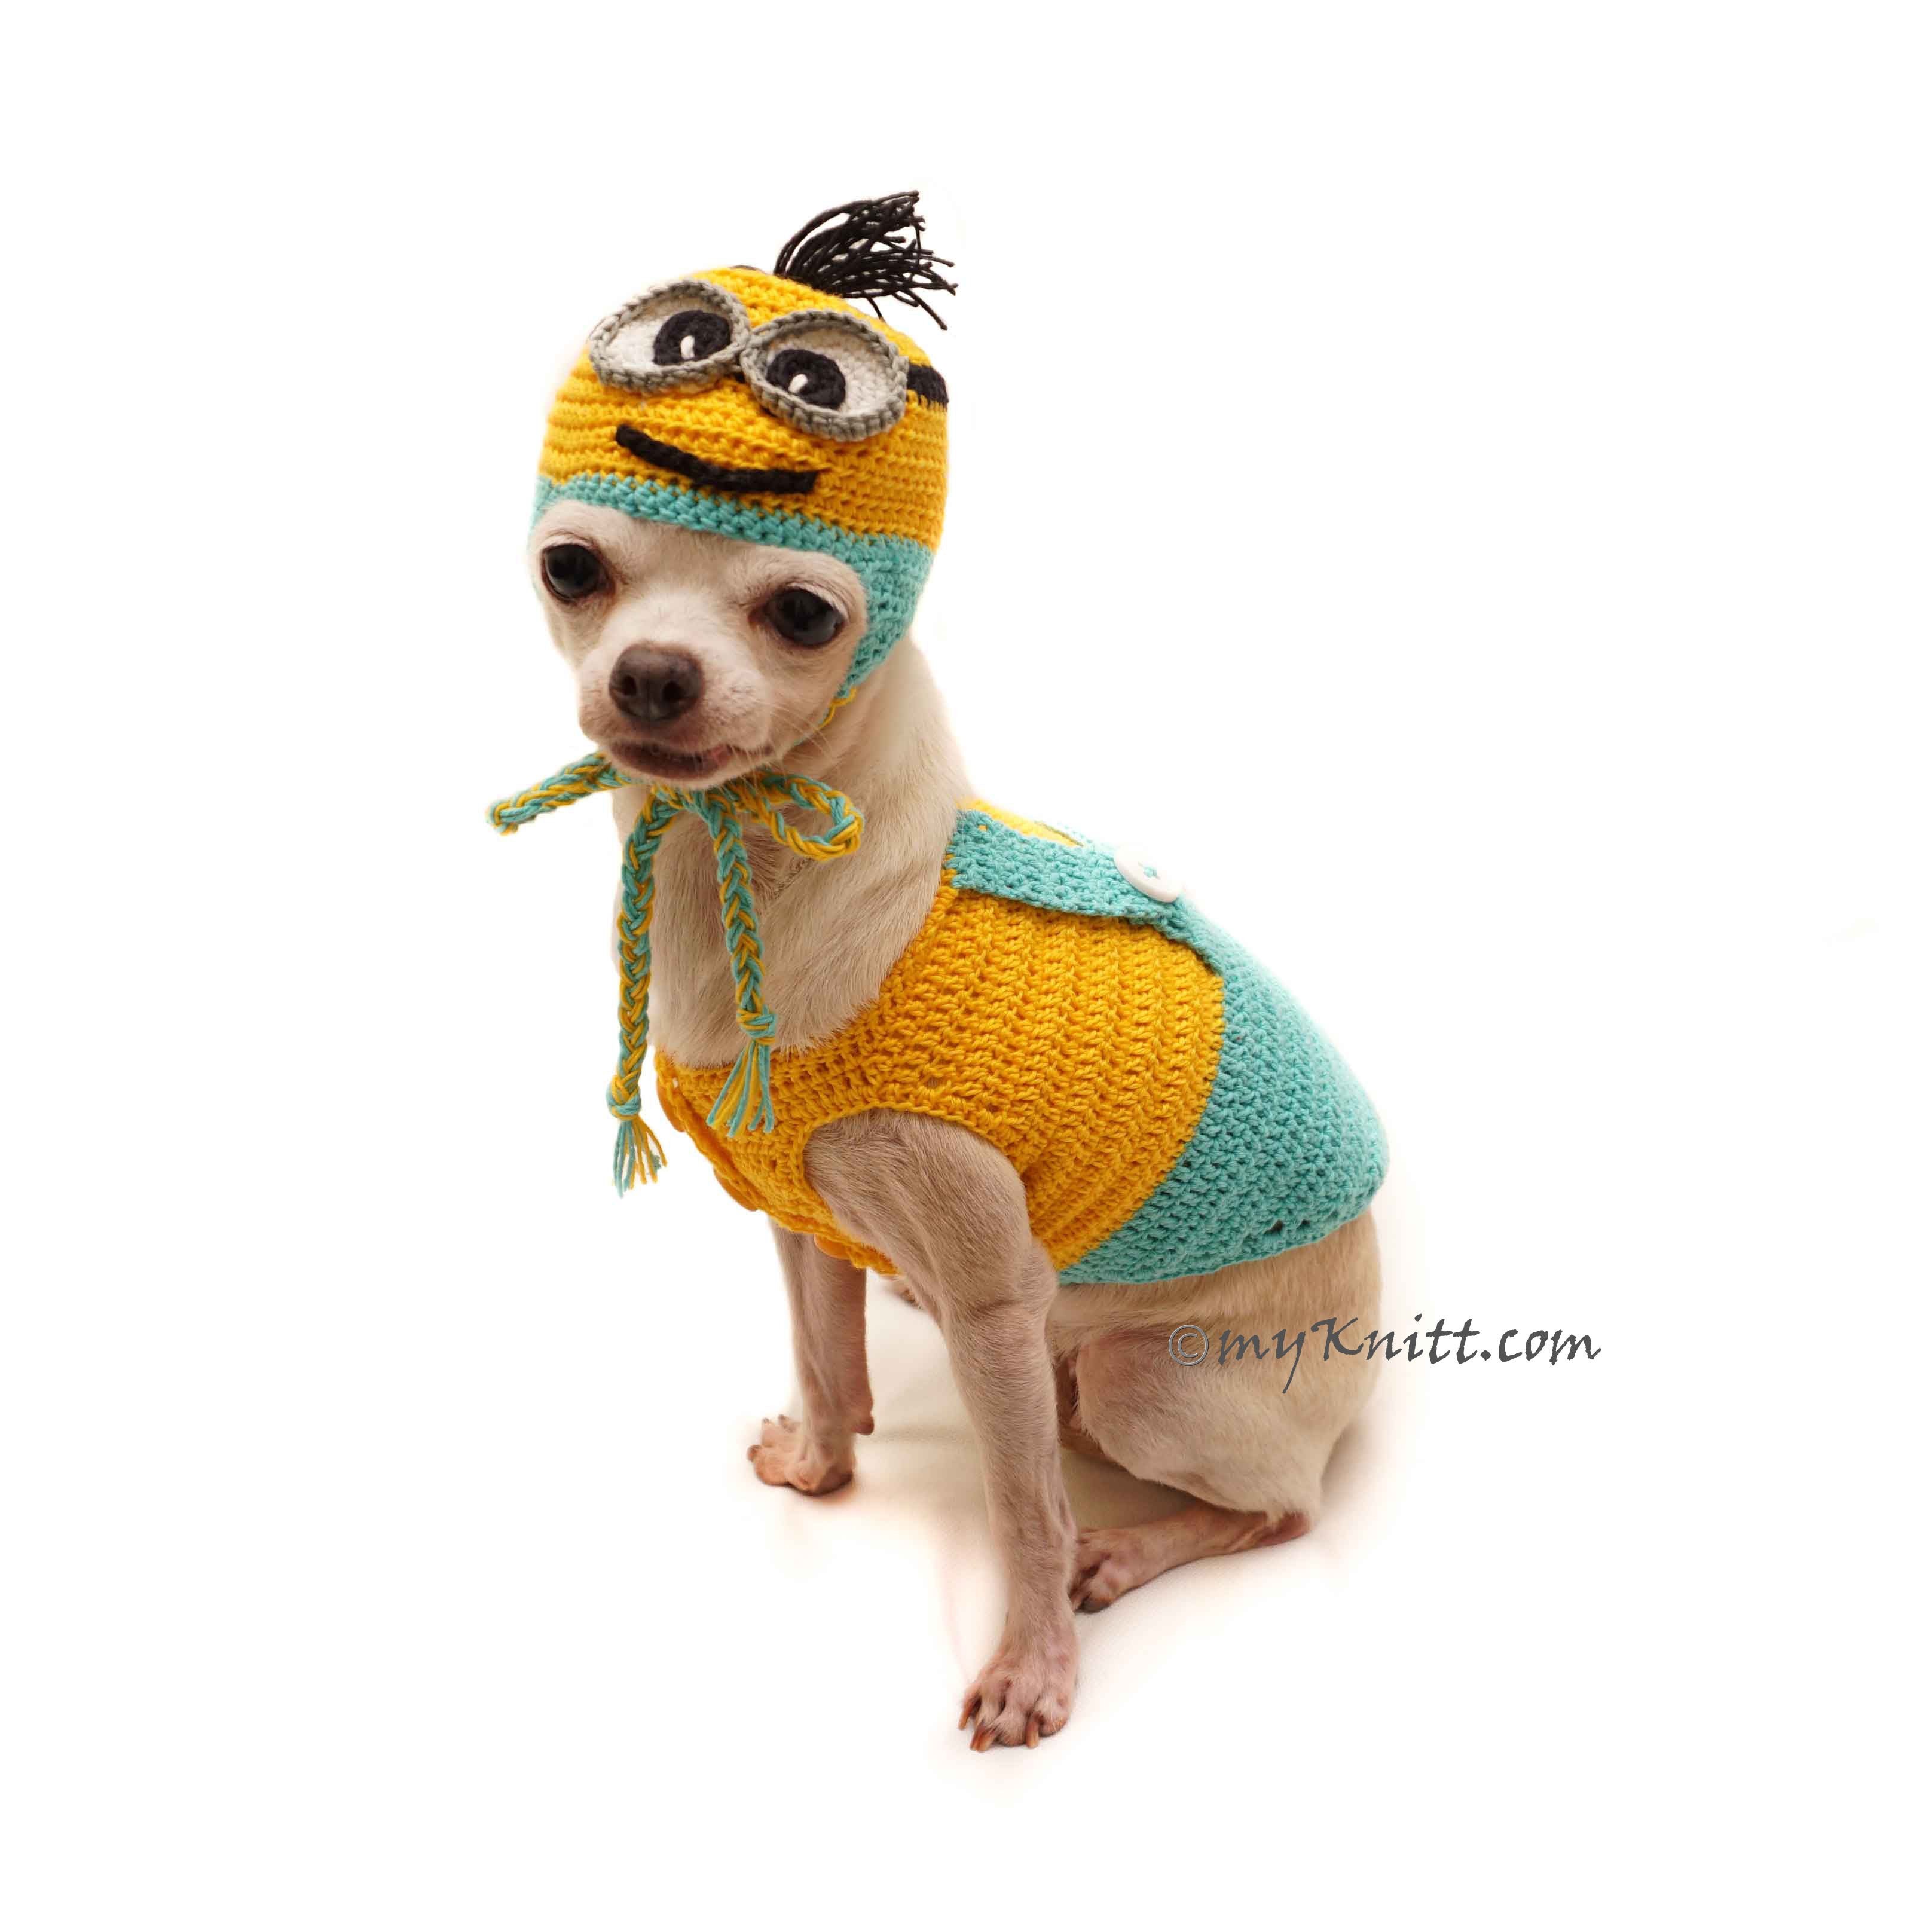 Minion Dog Costume, Chihuahua Costume, Despicable Me Dog Costume by Myknitt